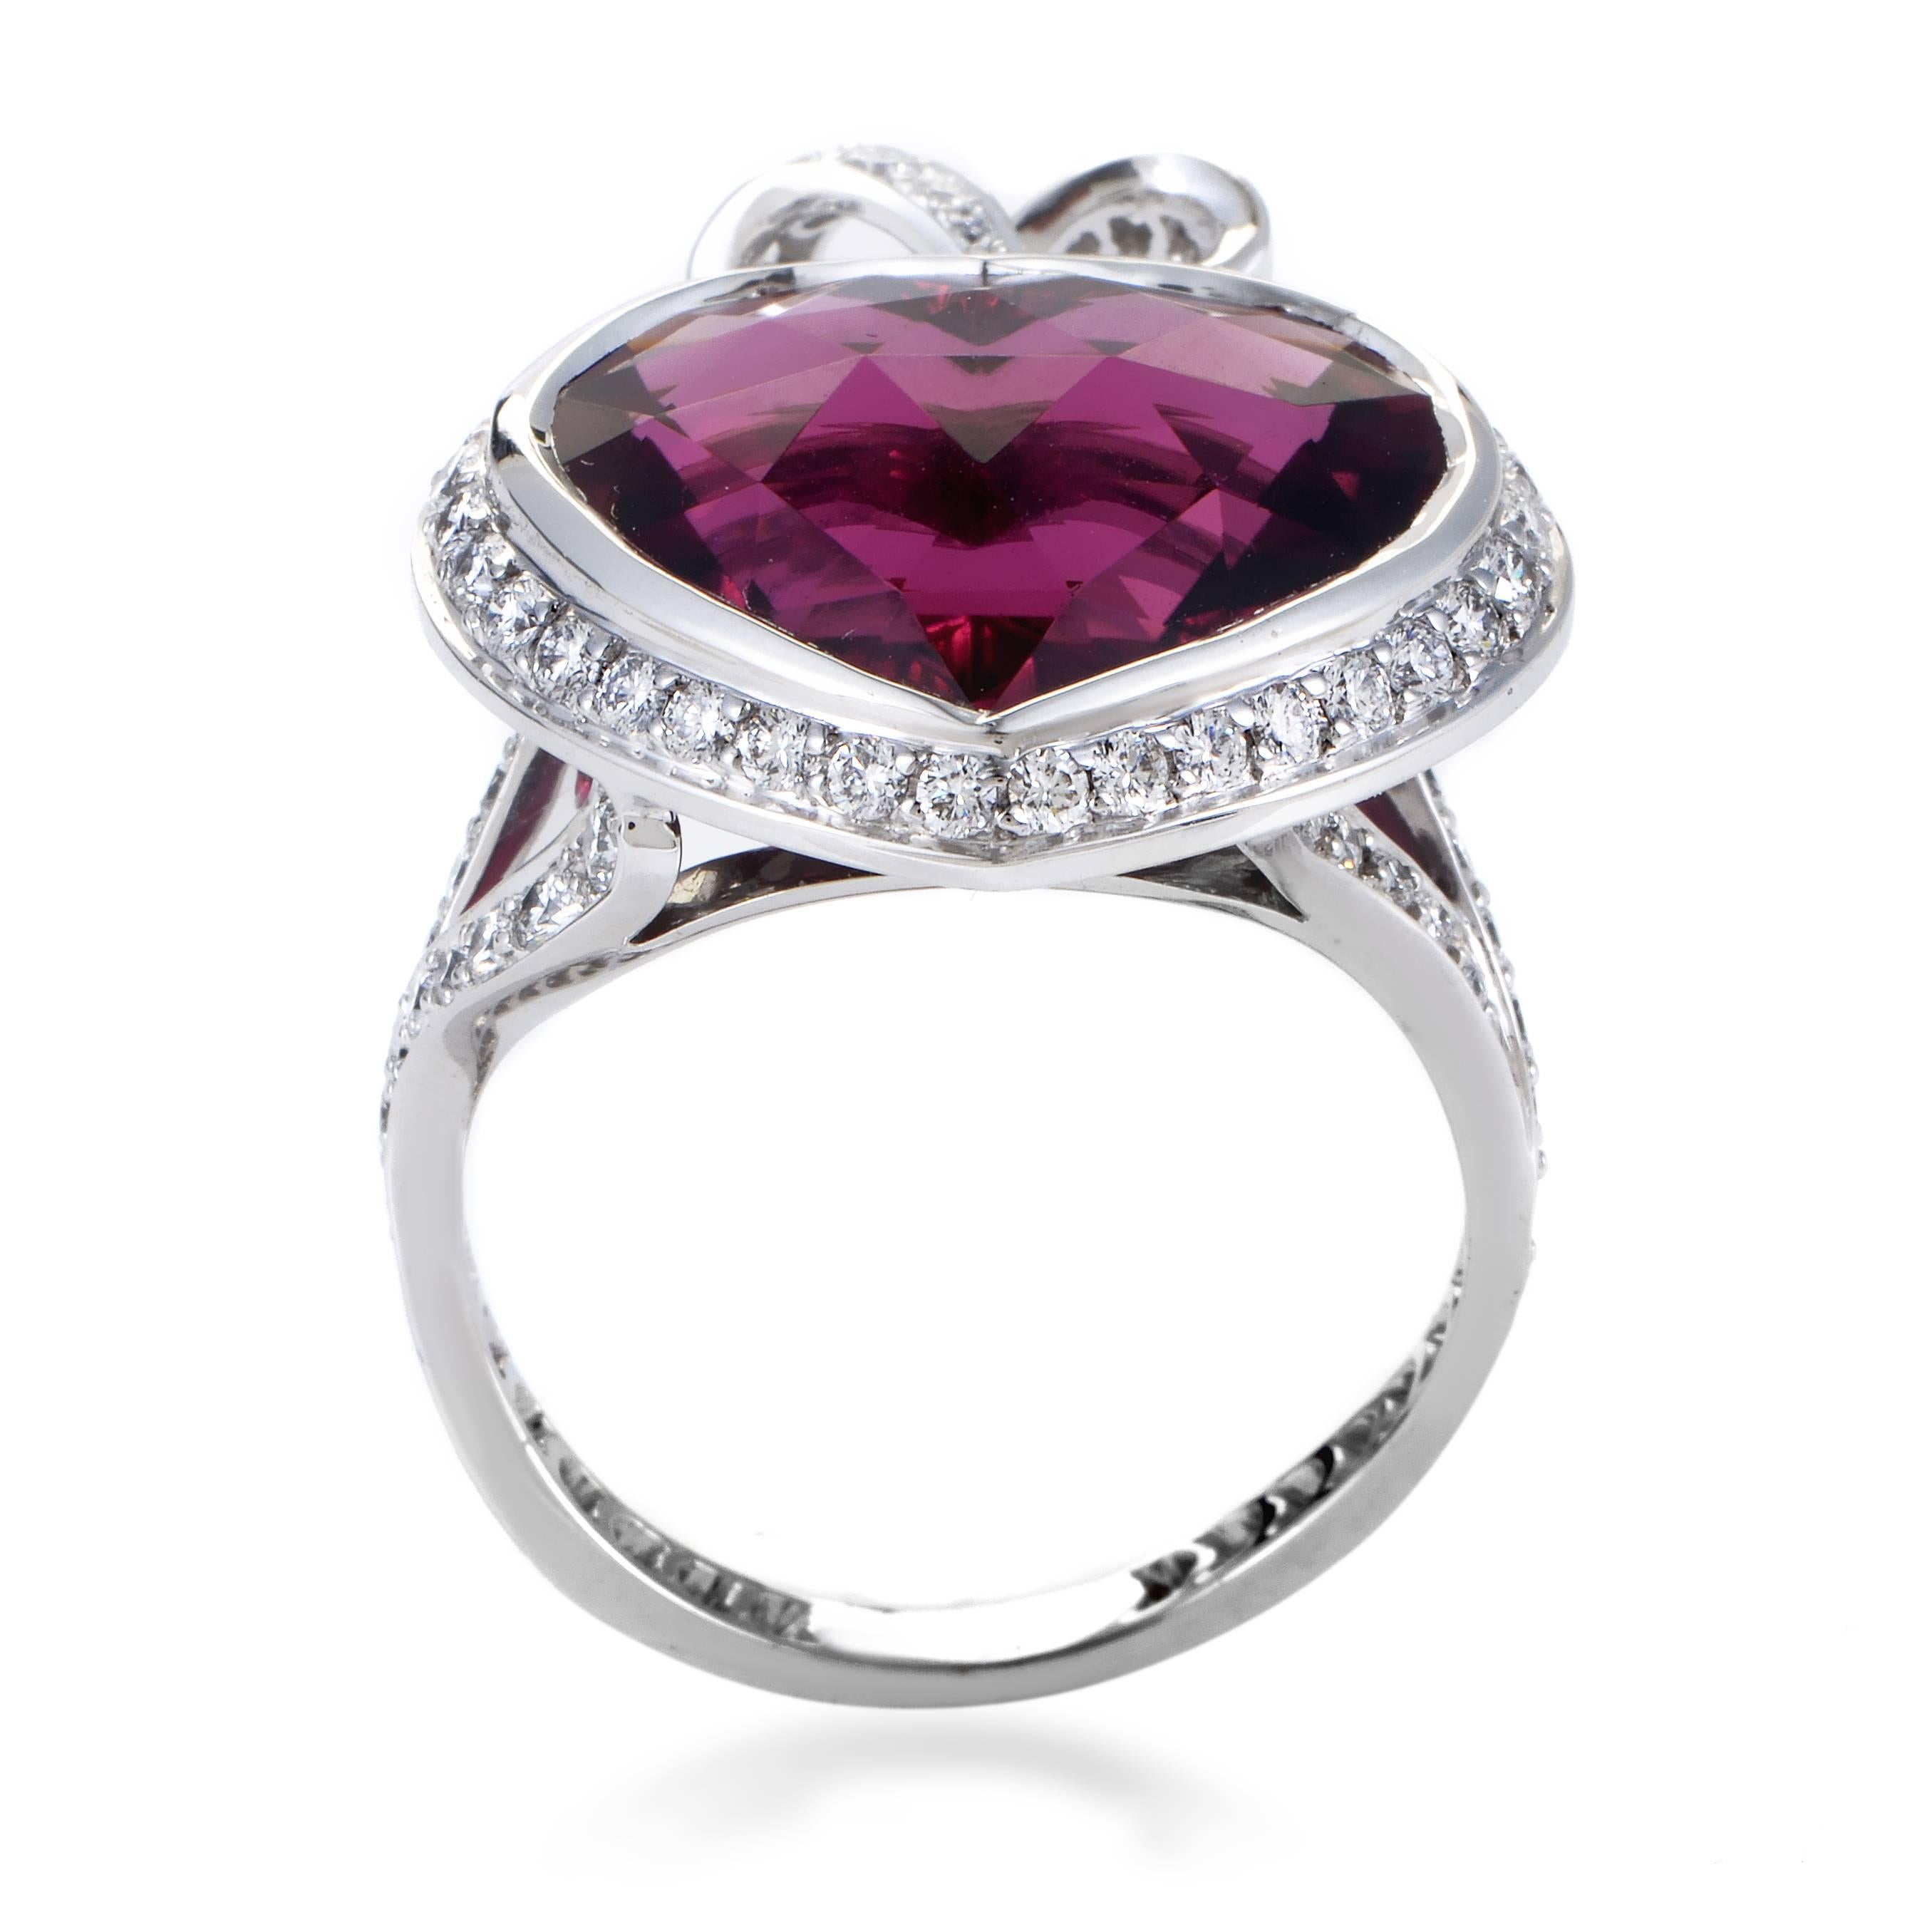 Provided excellent emphasis by the brilliantly bright combination of shimmering 18K white gold and resplendent diamonds weighing in total 1.40 carats, the romantic shape of a heart is given amazing depth and passionate nuance by the majestic pink